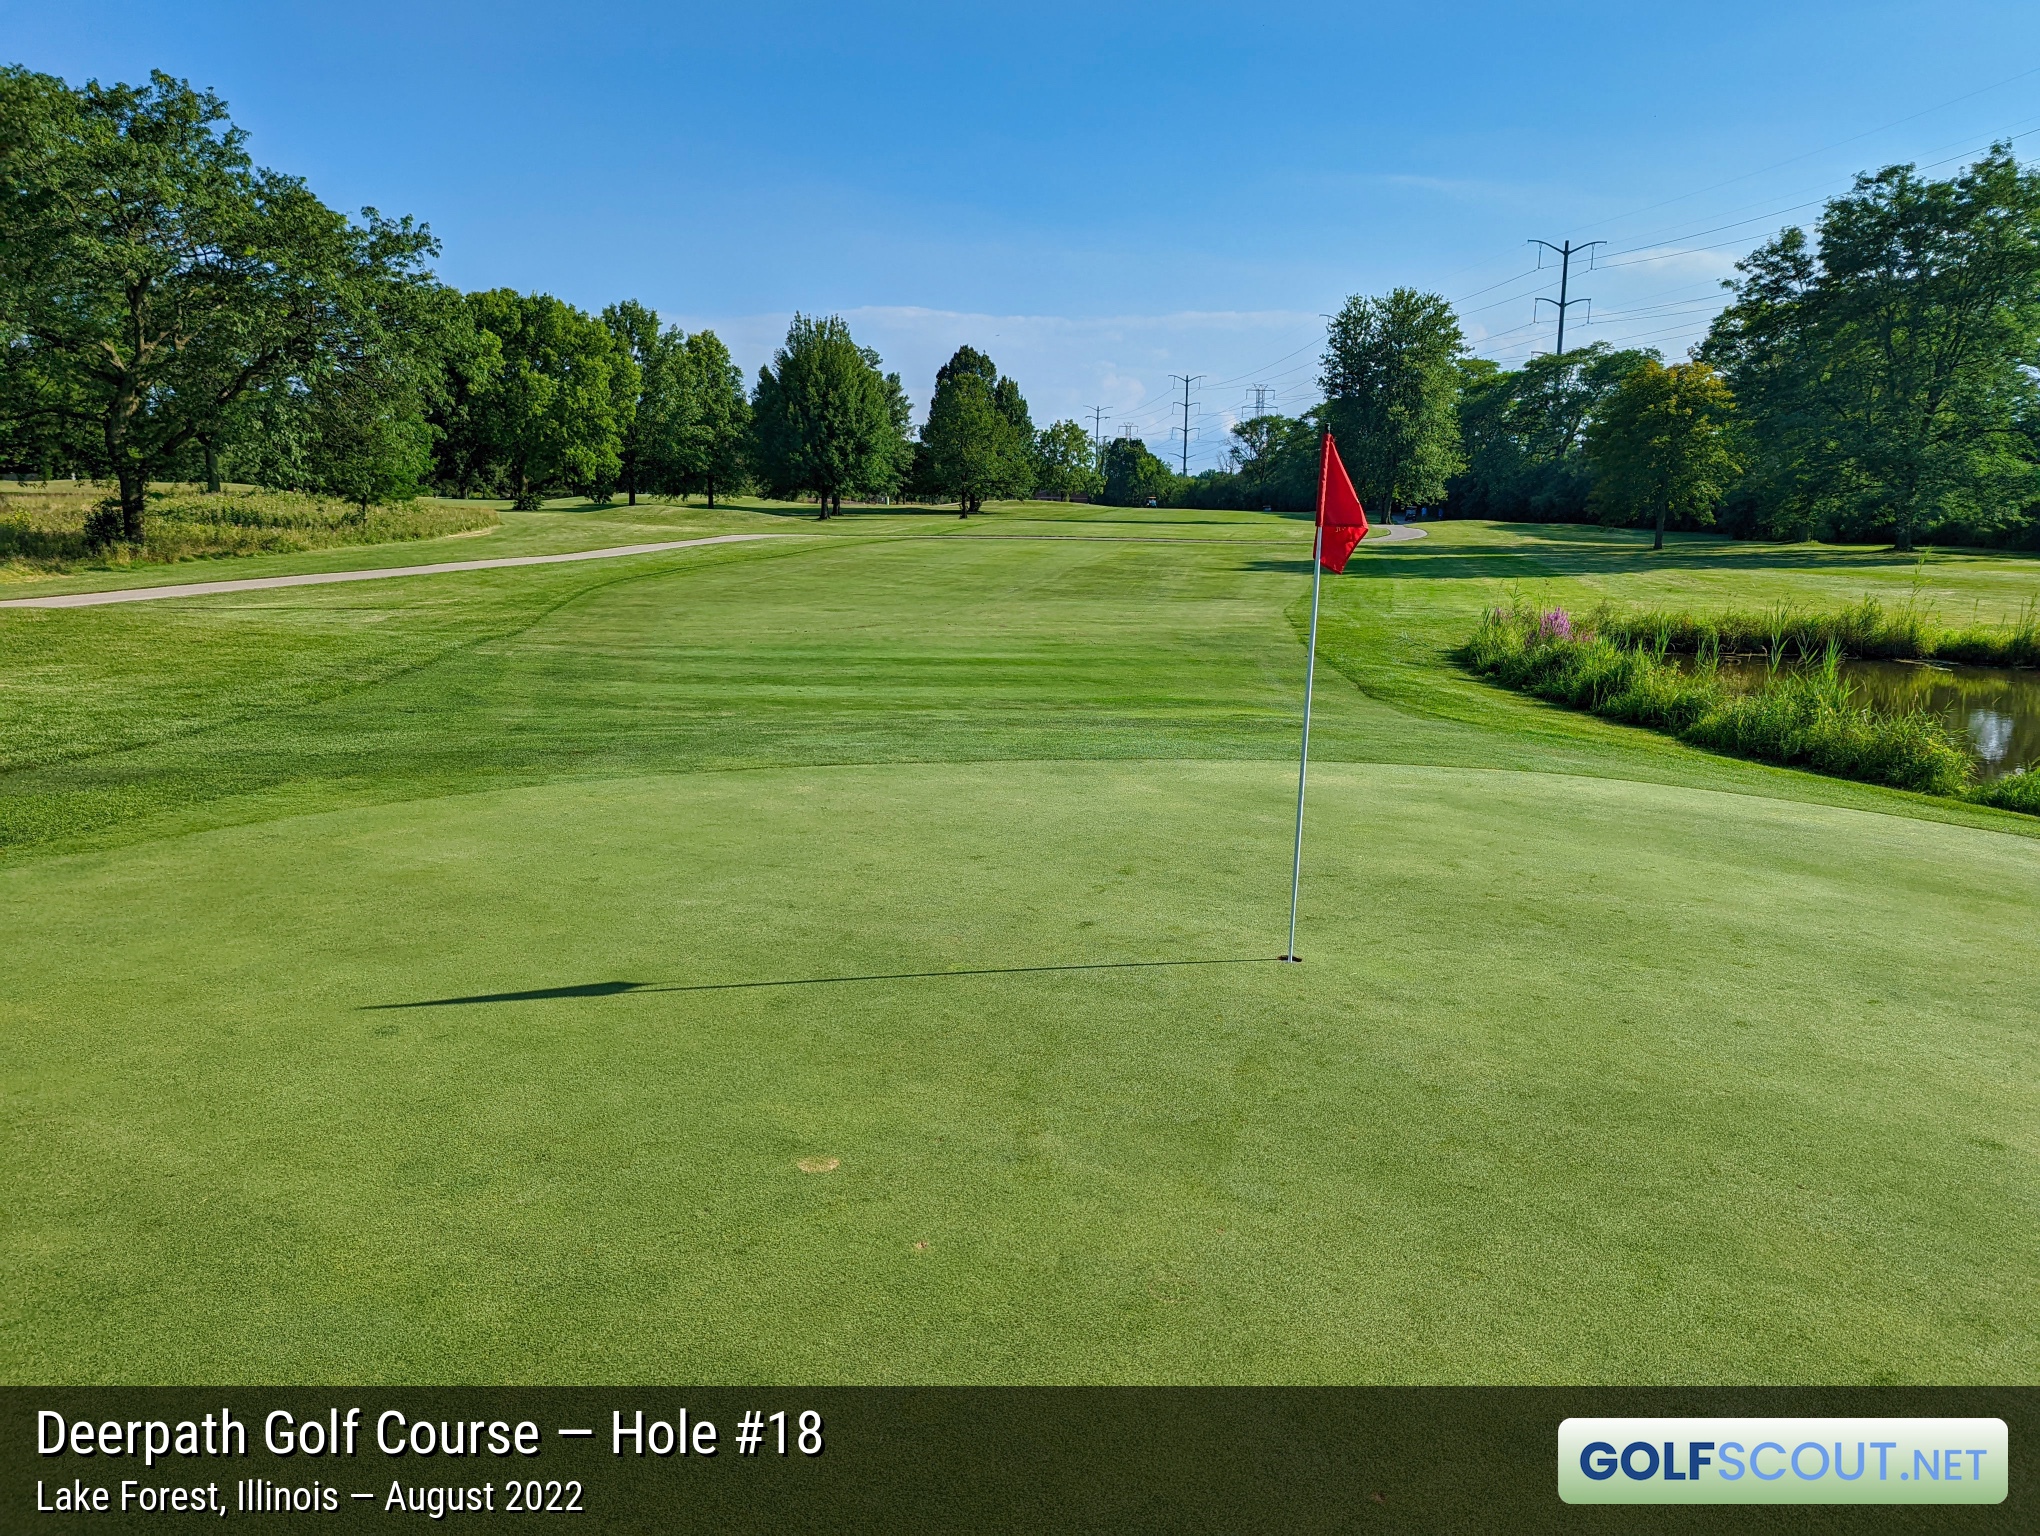 Photo of hole #18 at Deerpath Golf Course in Lake Forest, Illinois. 